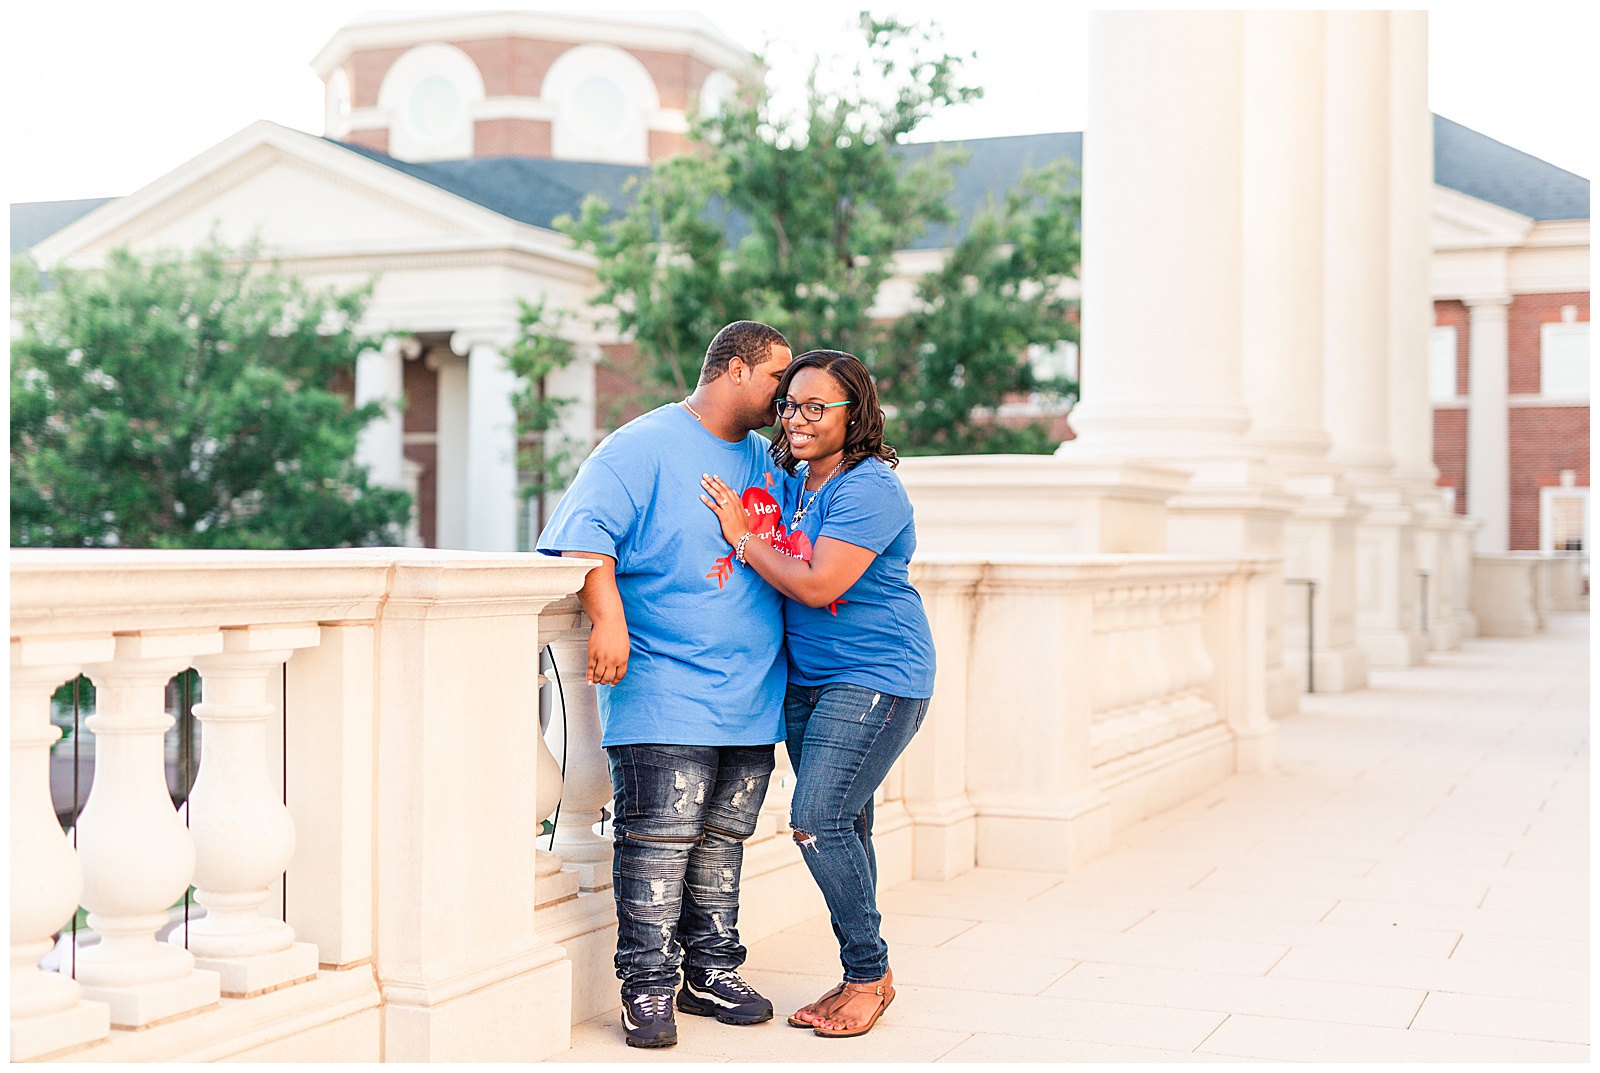 cnu-summer-engagement-session-charneice-kevin-23.jpg